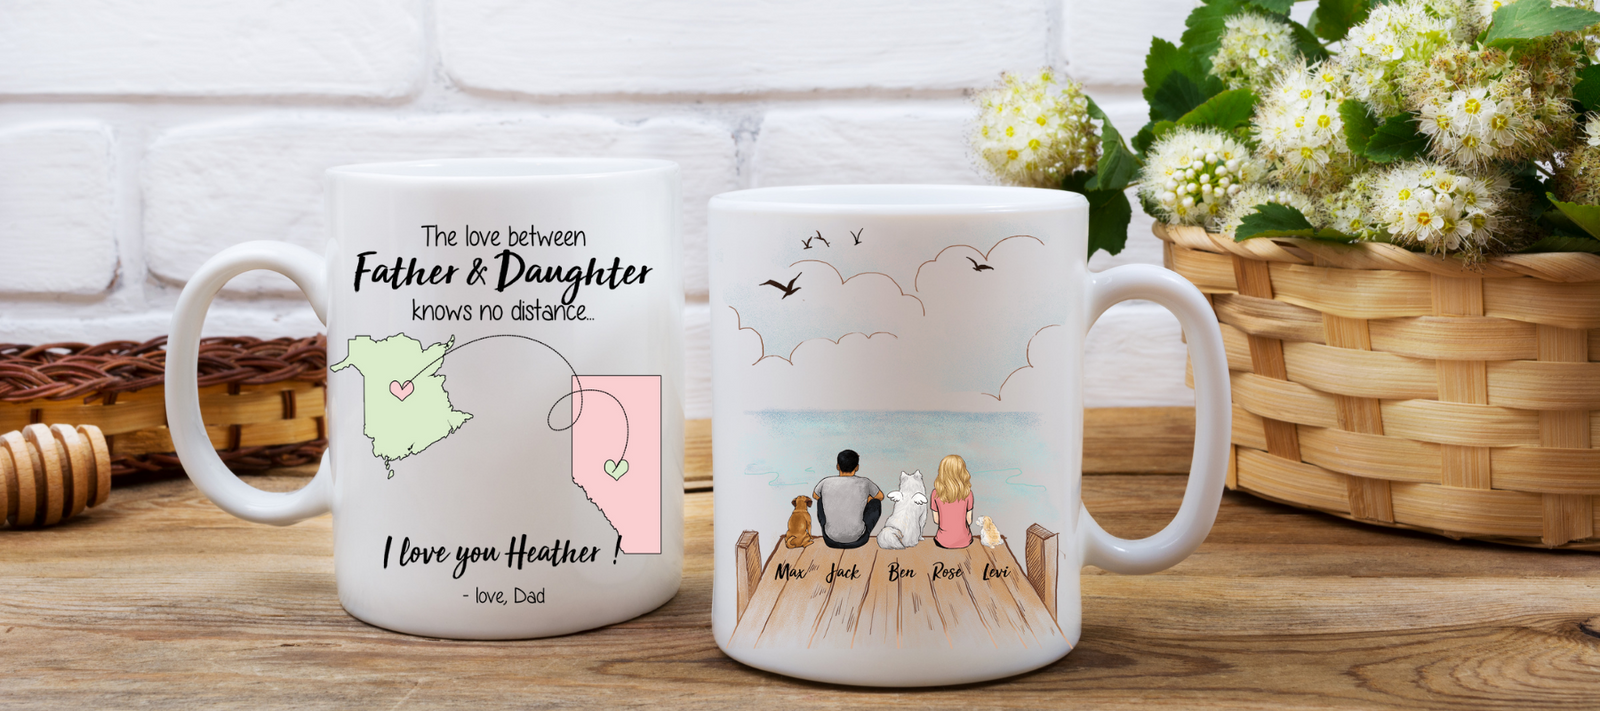 Life Is Tough My Darling But So Are You, Funny Print,Gift For Her, Gift For  Wife,Women Gift,Quotes Travel Mug by AlexTypography